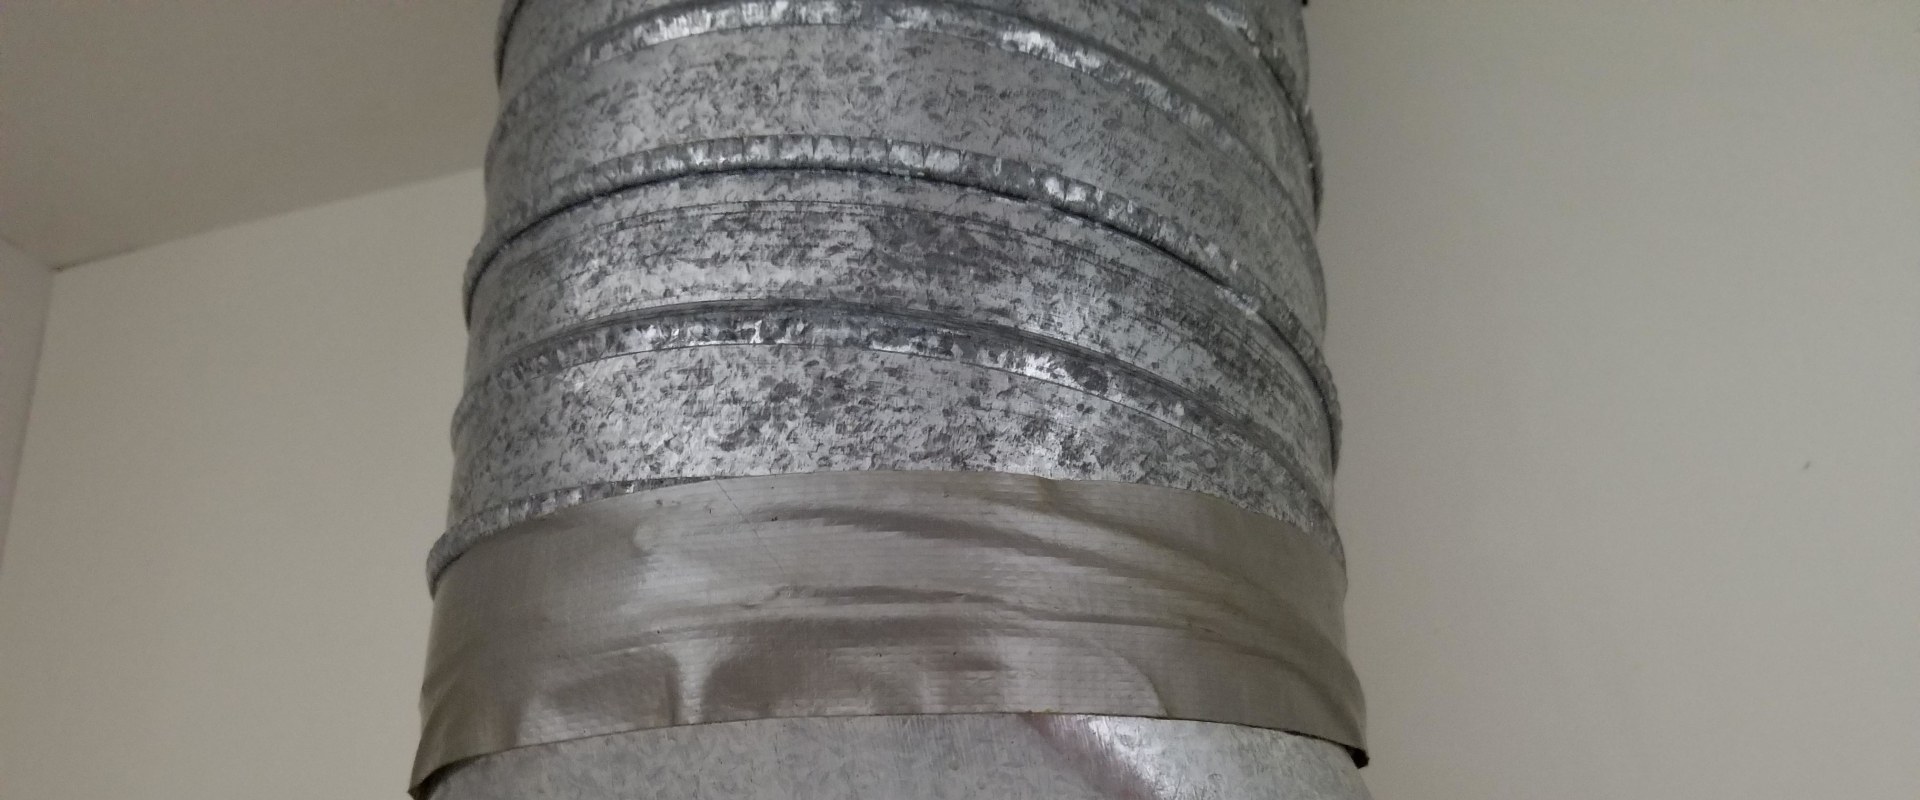 Should You Use the Right Material to Seal Ducts?